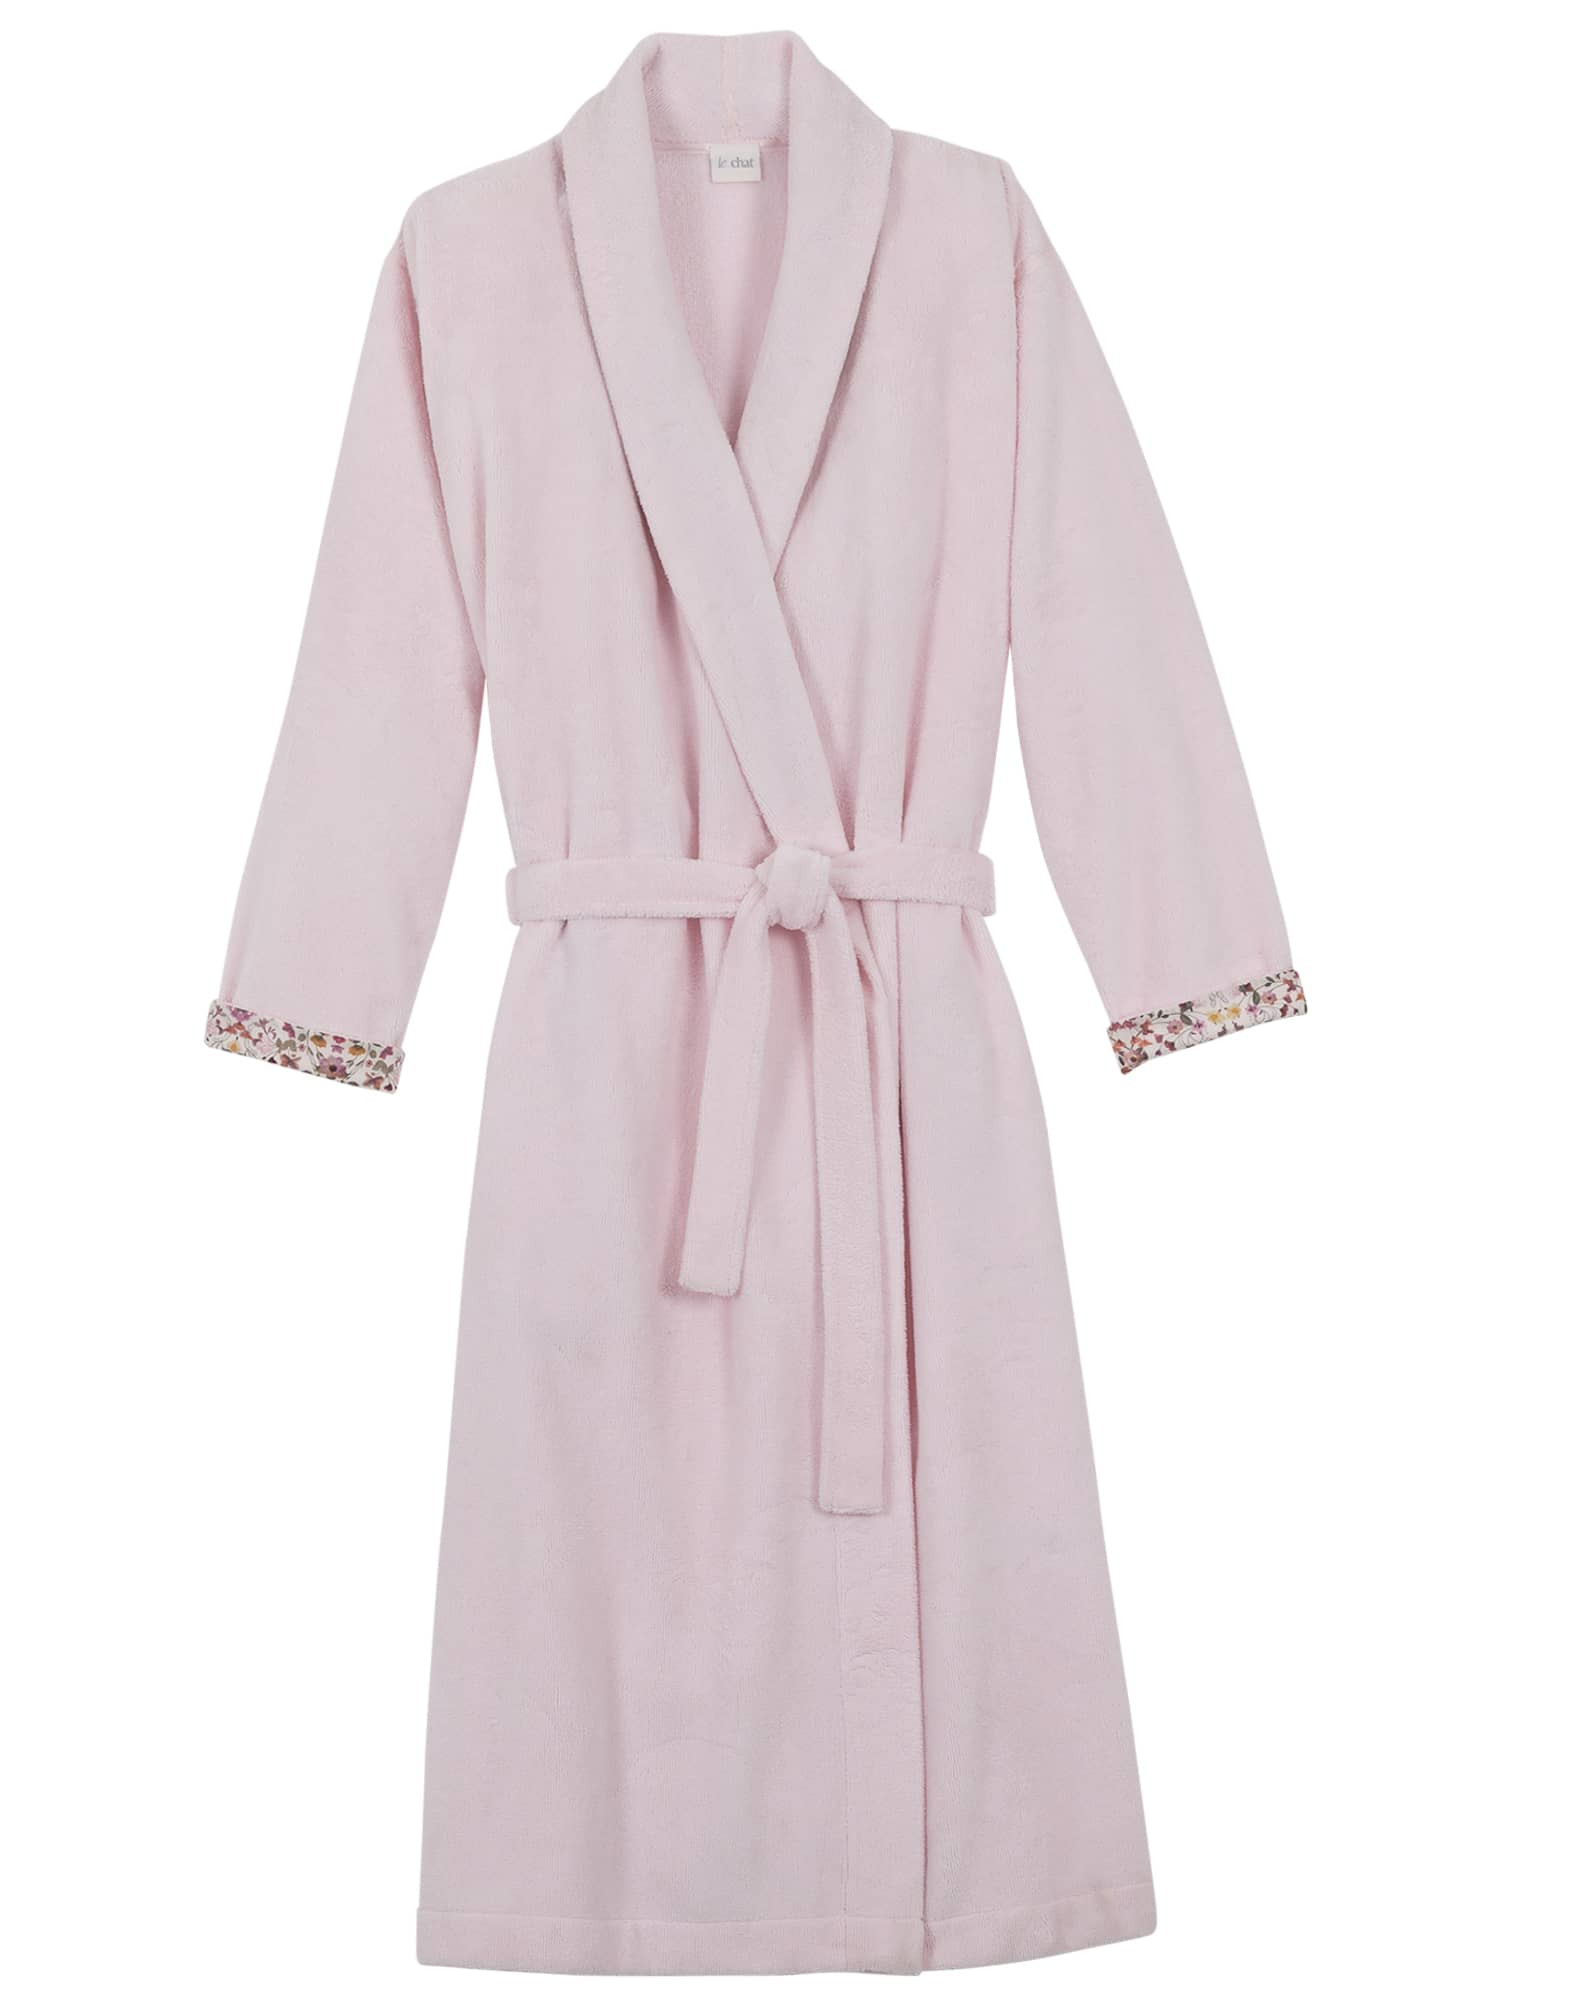 Trendyol Collection Dressing Gowns Styles, Prices - Trendyol